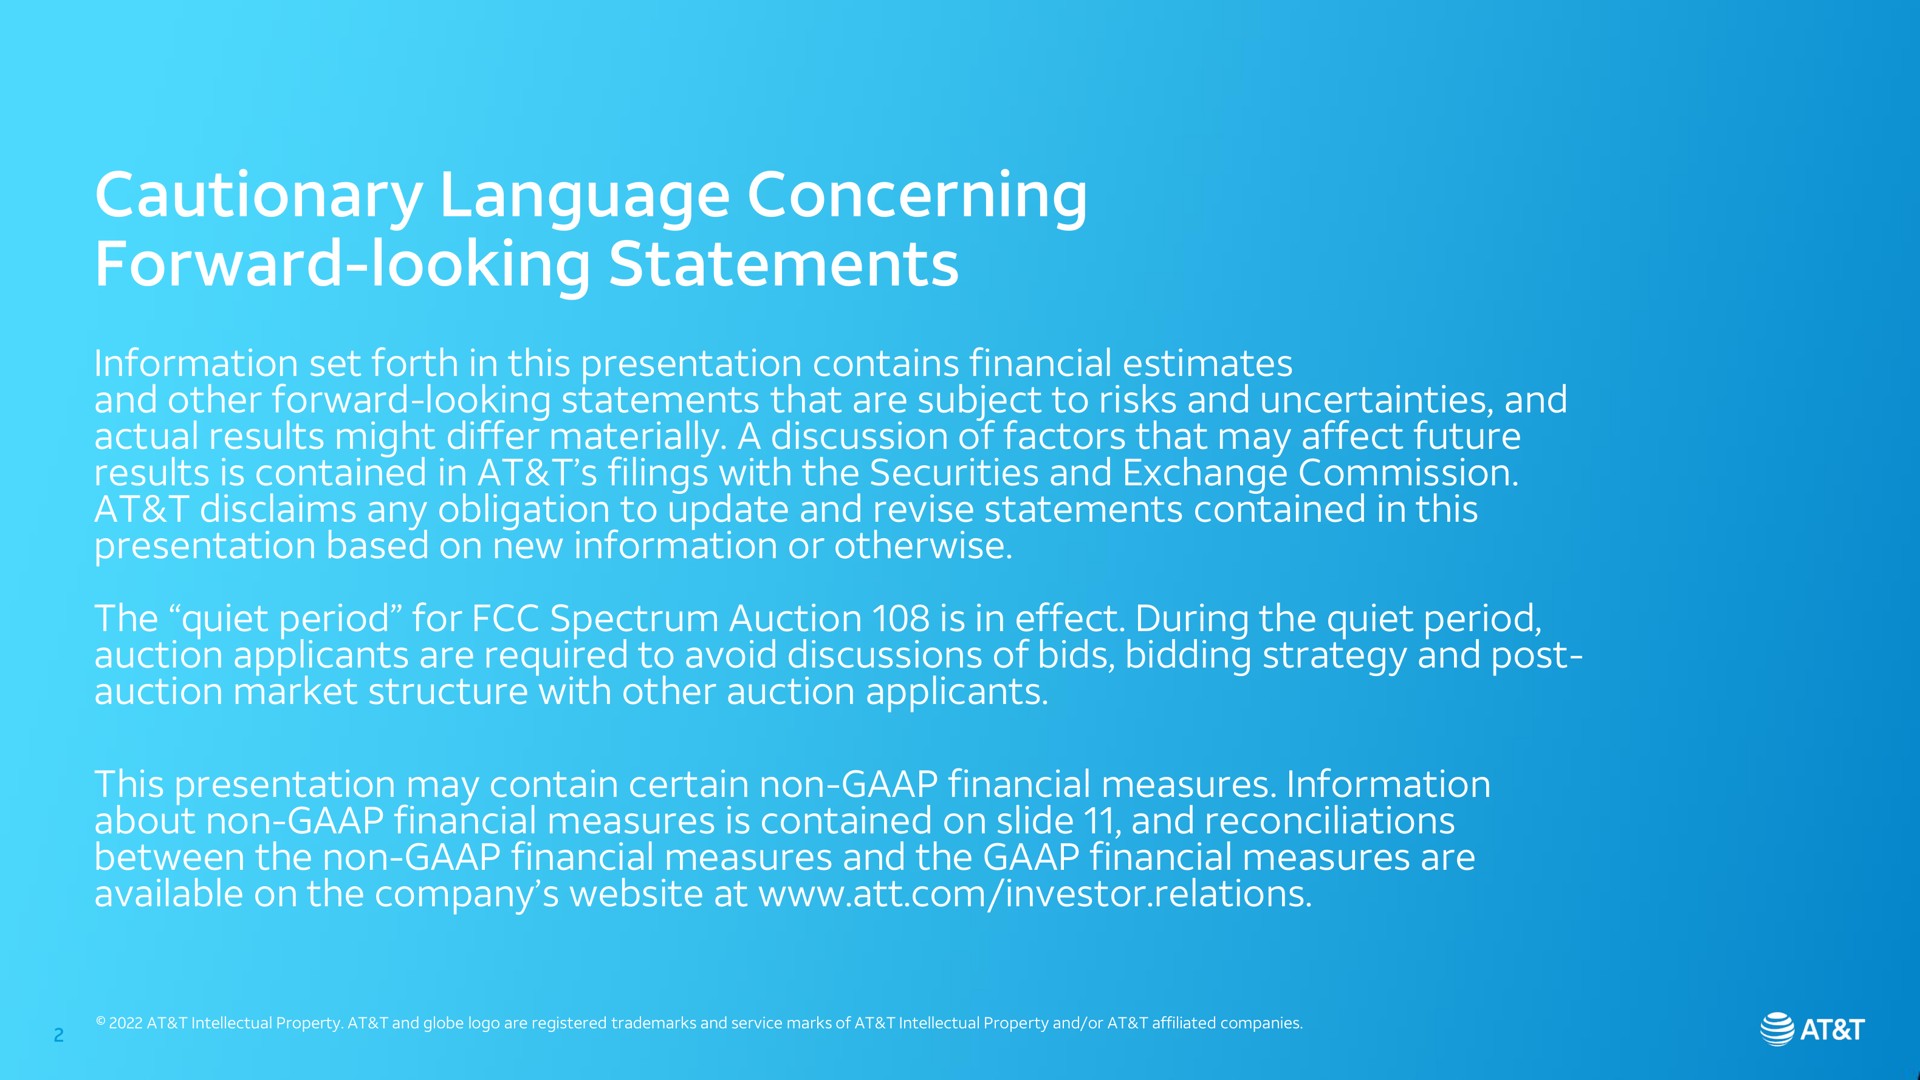 cautionary language concerning forward looking statements information set forth in this presentation contains financial estimates and other forward looking statements that are subject to risks and uncertainties and actual results might differ materially a discussion of factors that may affect future results is contained in at filings with the securities and exchange commission at disclaims any obligation to update and revise statements contained in this presentation based on new information or otherwise the quiet period for spectrum auction is in effect during the quiet period auction applicants are required to avoid discussions of bids bidding strategy and post auction market structure with other auction applicants this presentation may contain certain non financial measures information about non financial measures is contained on slide and reconciliations between the non financial measures and the financial measures are available on the company at investor relations | AT&T